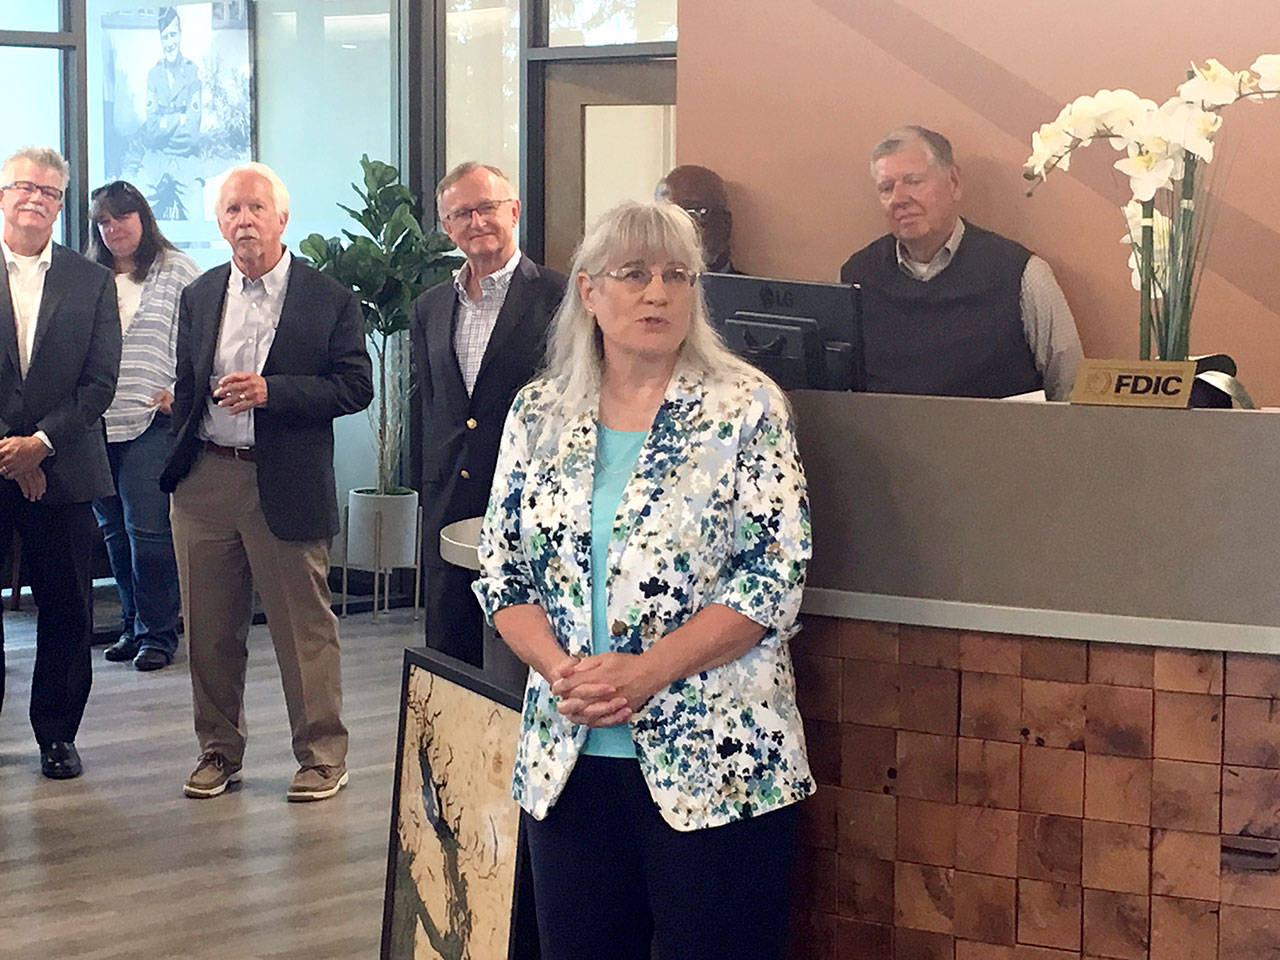 Karen McCormick is honored at a retirement ceremony at the First Federal branch in east Port Angeles. McCormick started as a teller at the branch in 1977 and later became First Federal CEO and First Federal Community Foundation executive director. (Rob Ollikainen/Peninsula Daily News)